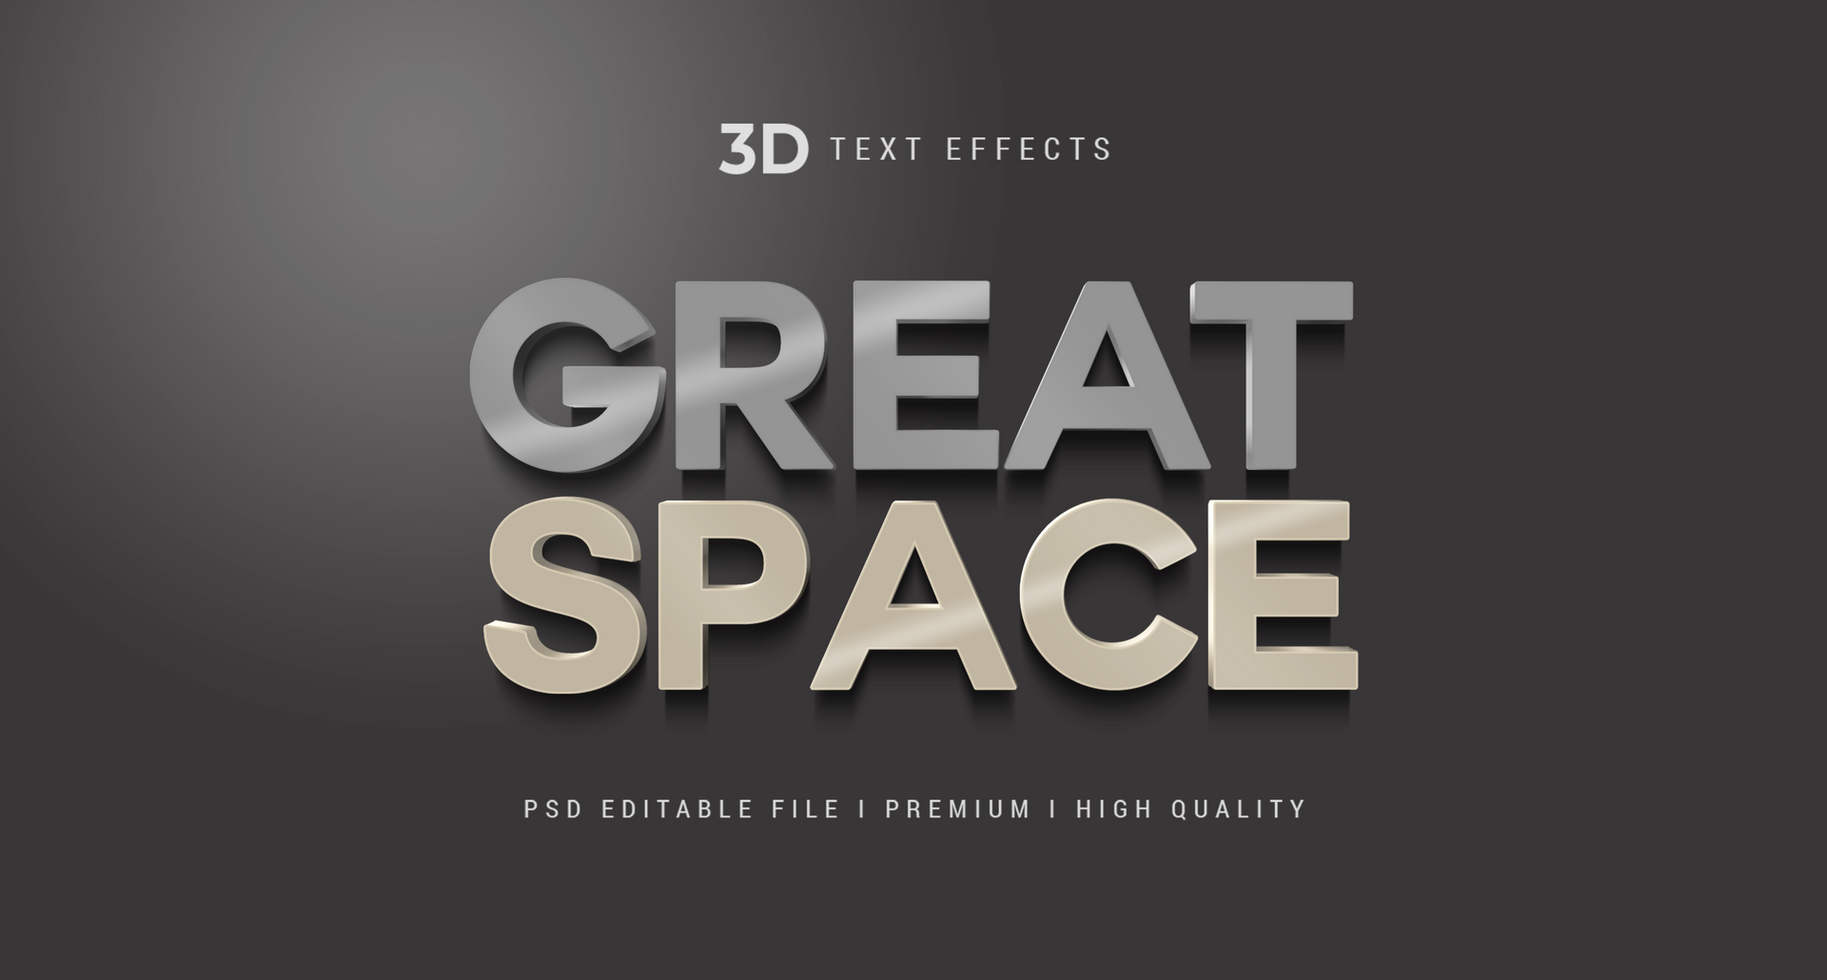 Great Space 3d Text Style Effect Mockup Template psd